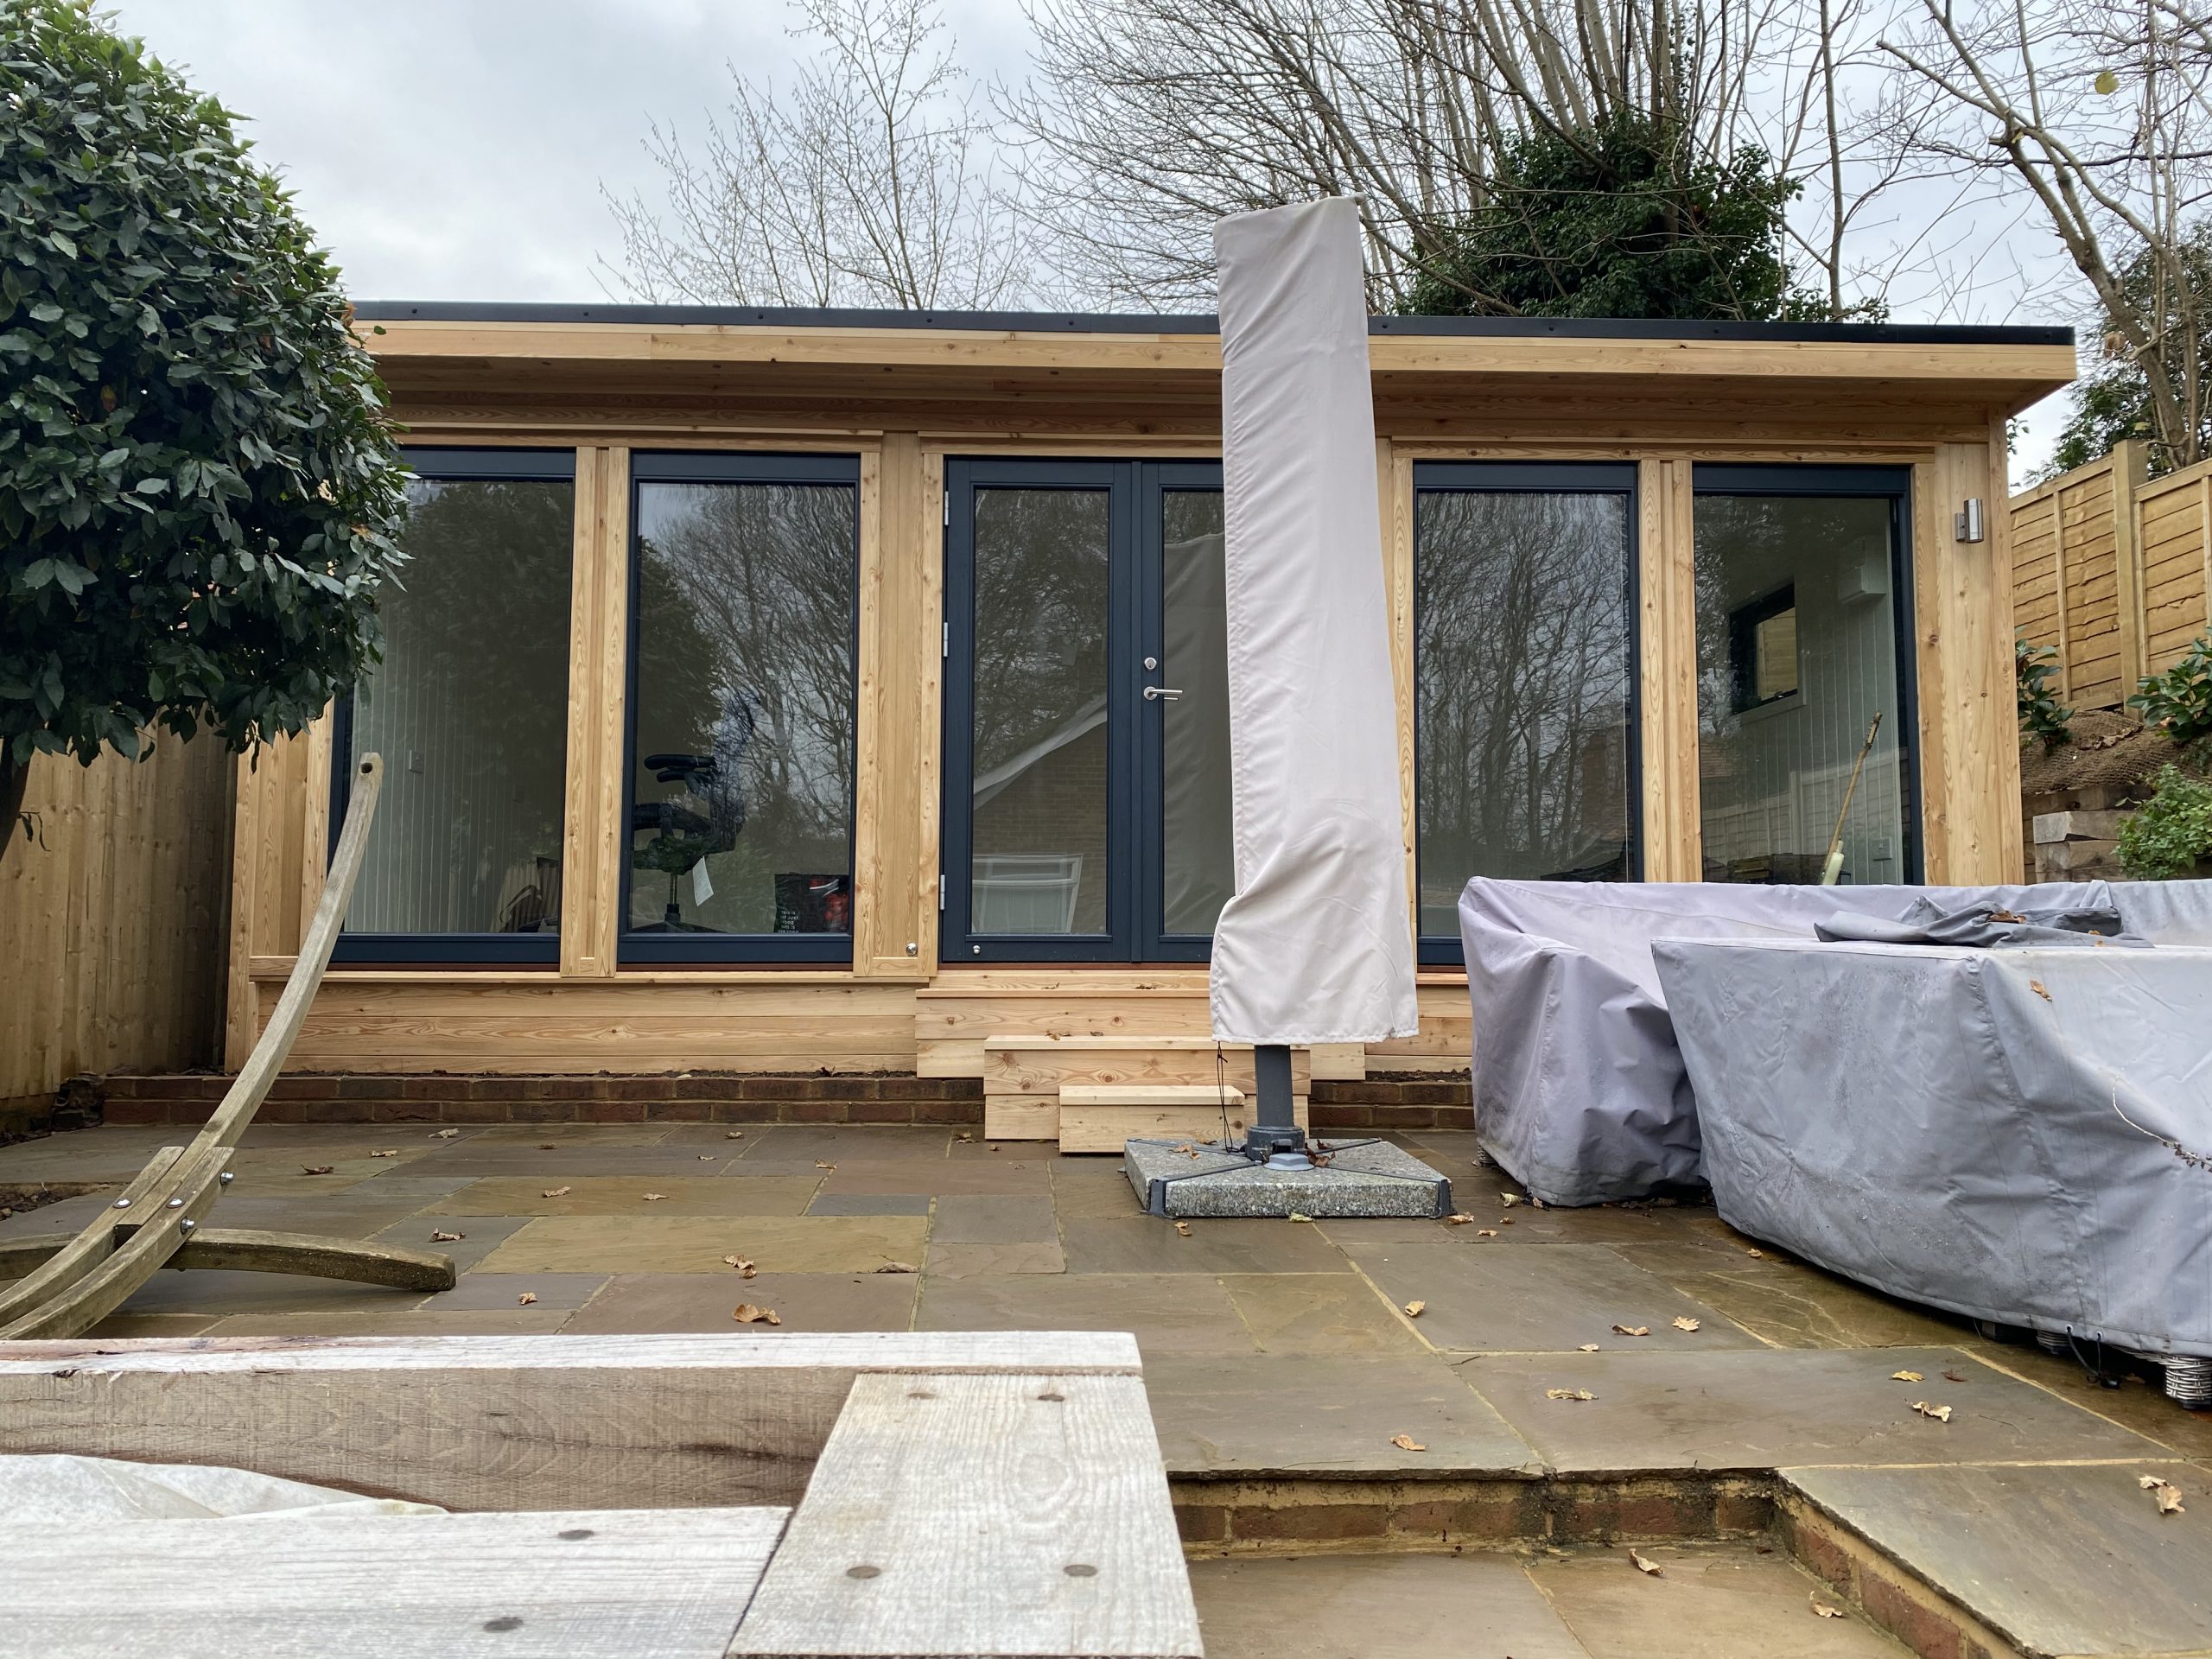 Insulated garden room made of quality timber featuring a front wall of windows and glass doors.